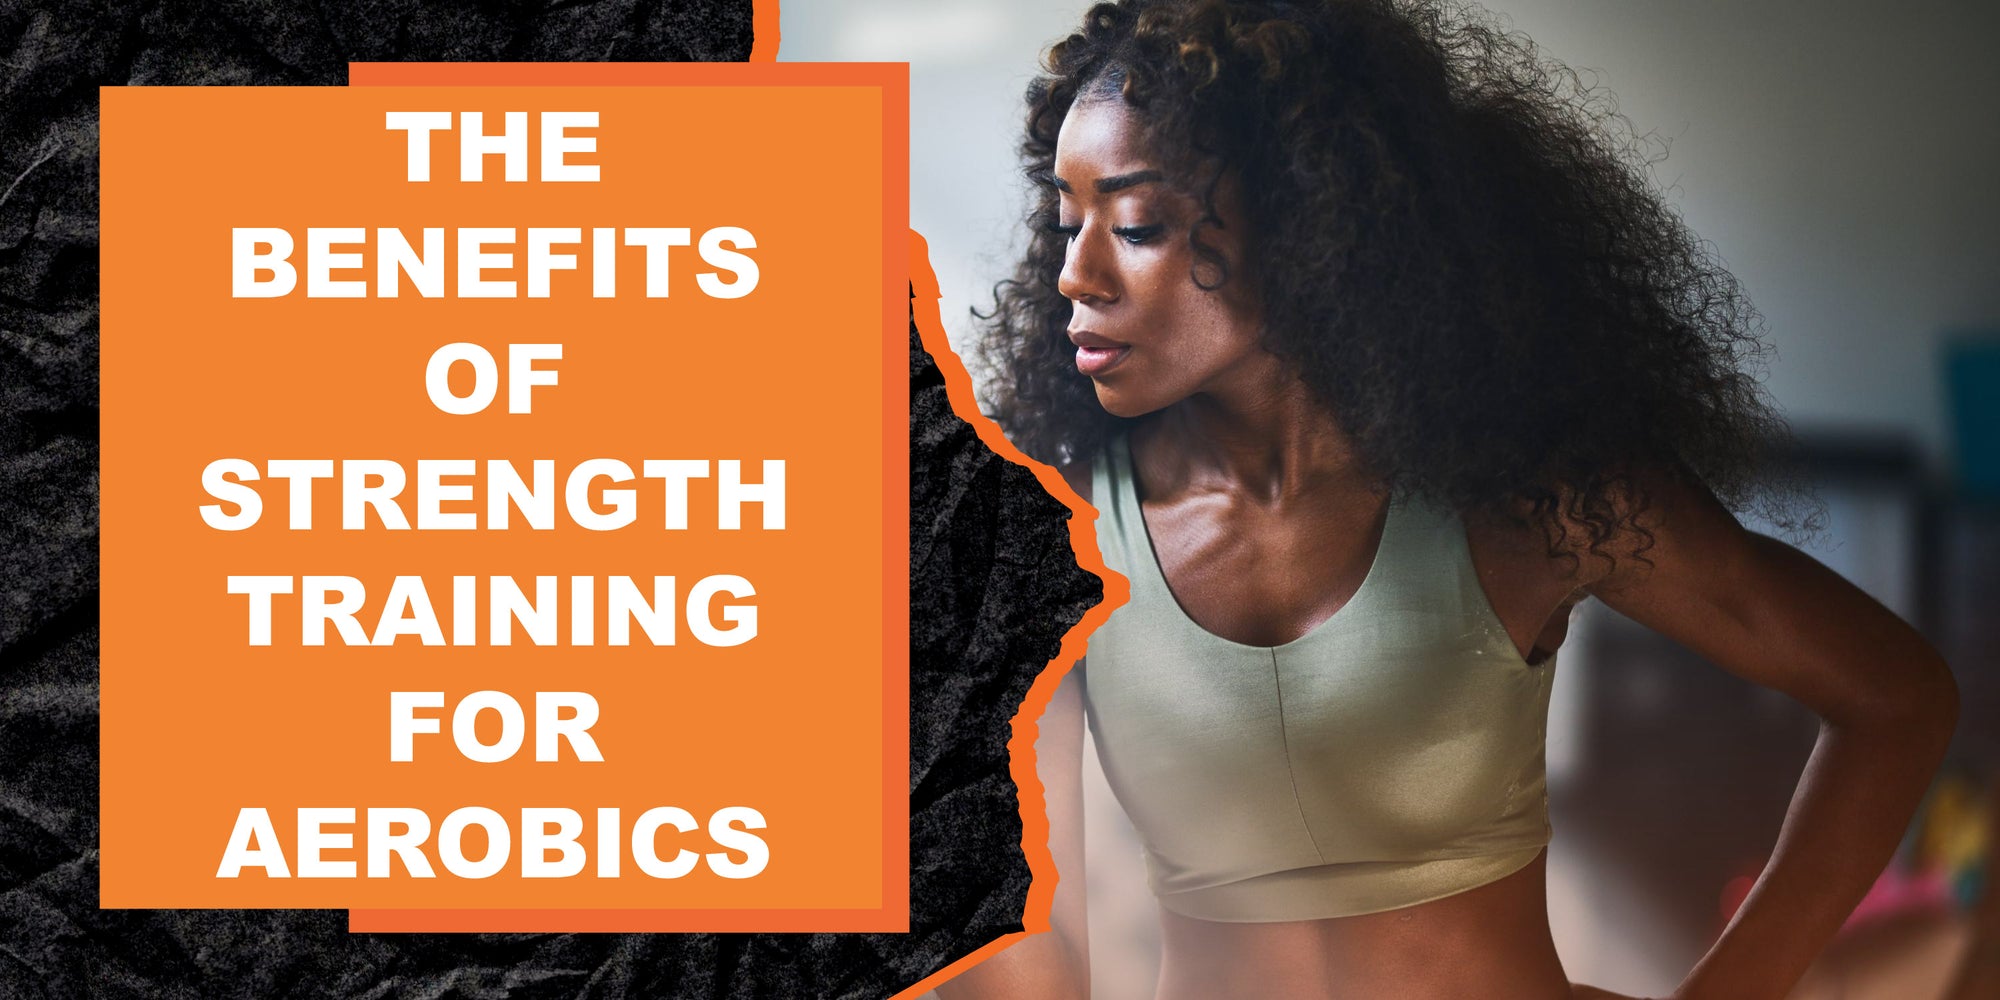 The Benefits of Strength Training for Aerobics